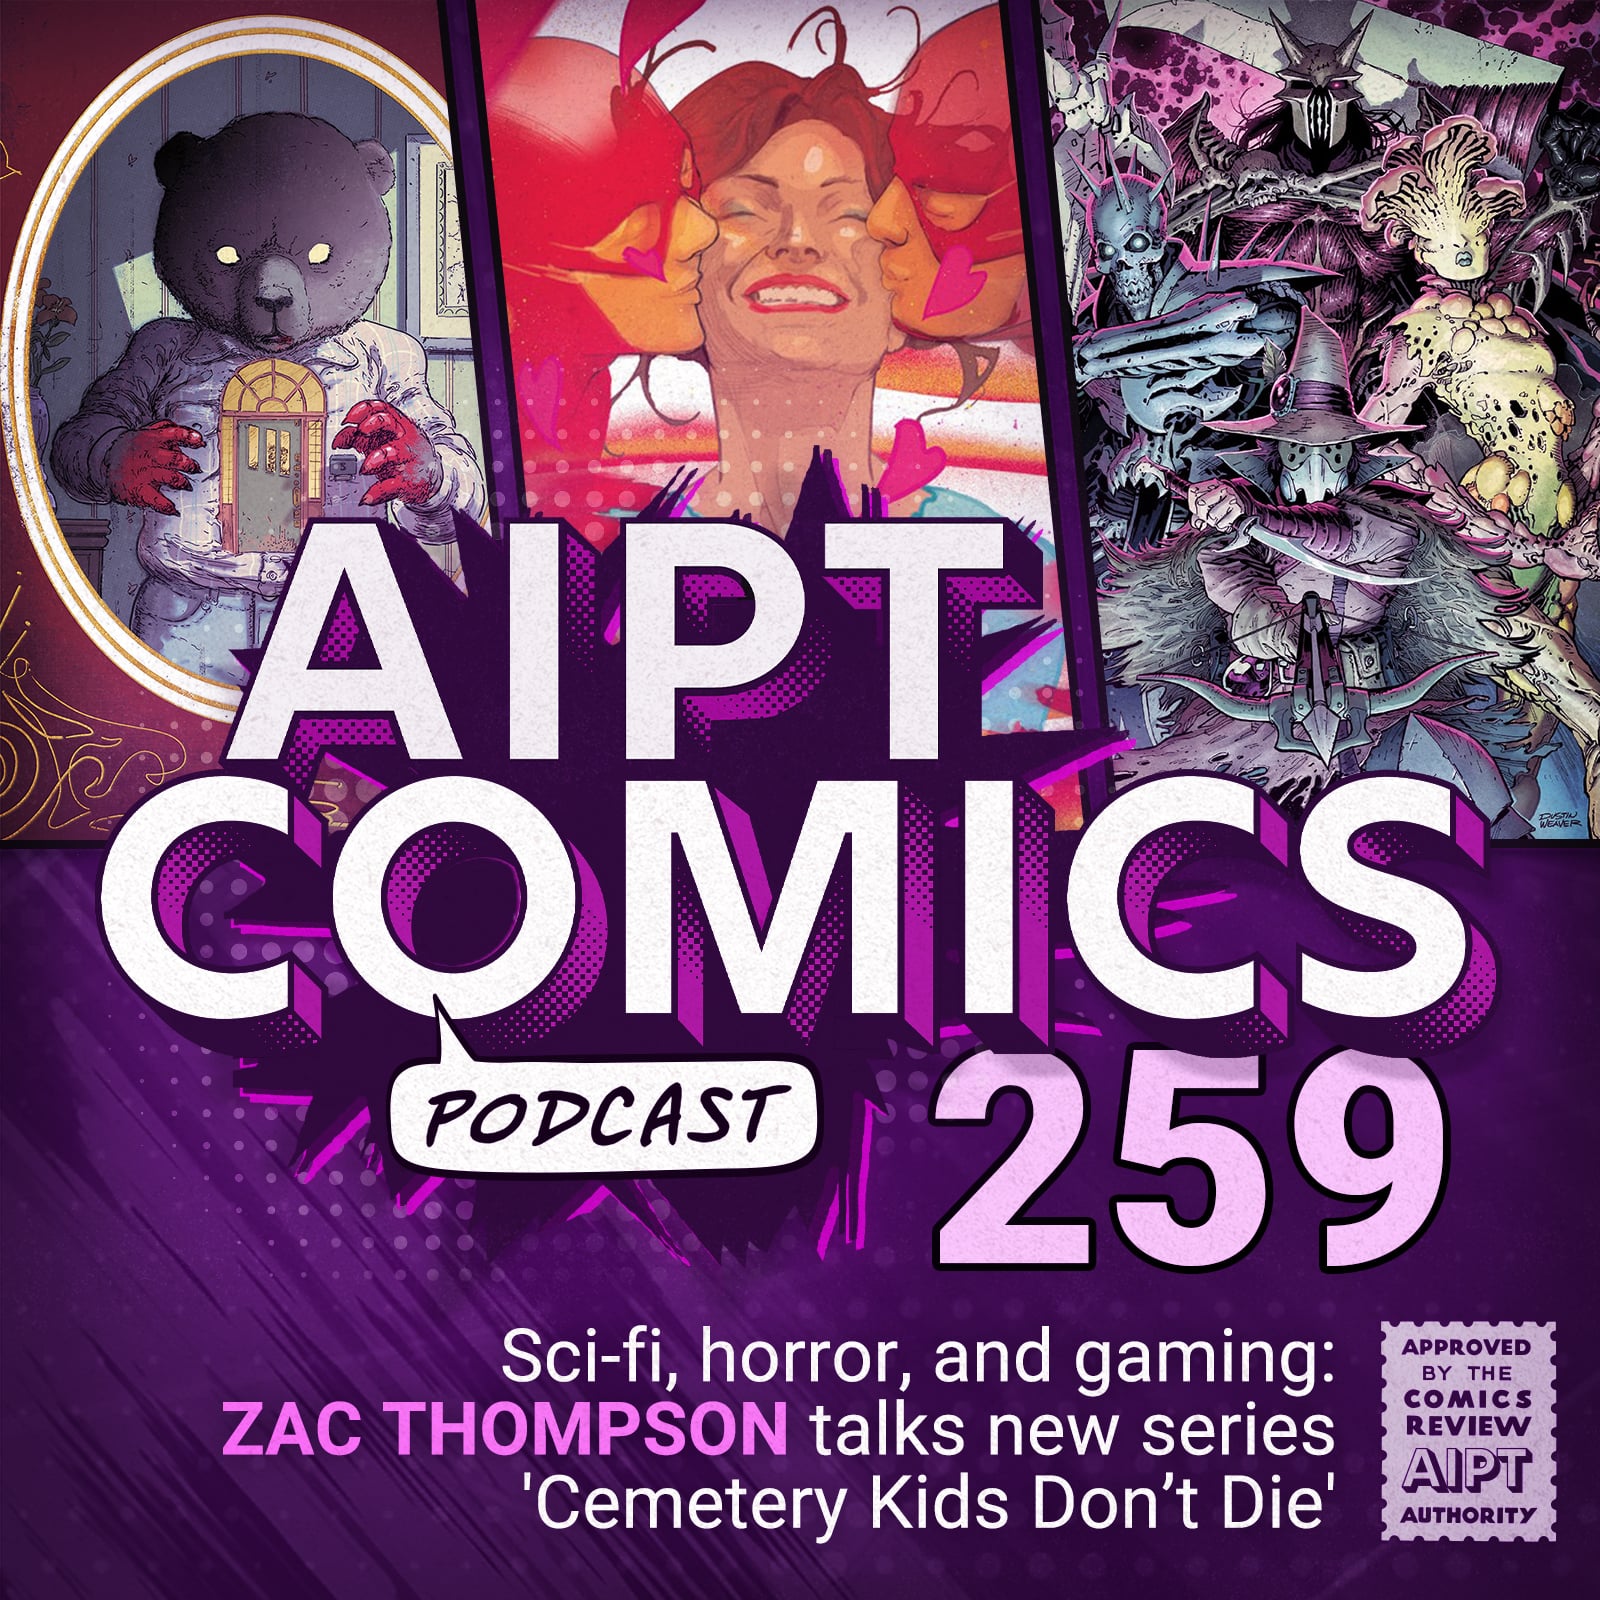 AIPT Comics Podcast Episode 259: Sci-fi, horror, and gaming: Zac Thompson talks new series 'Cemetery Kids Don’t Die'